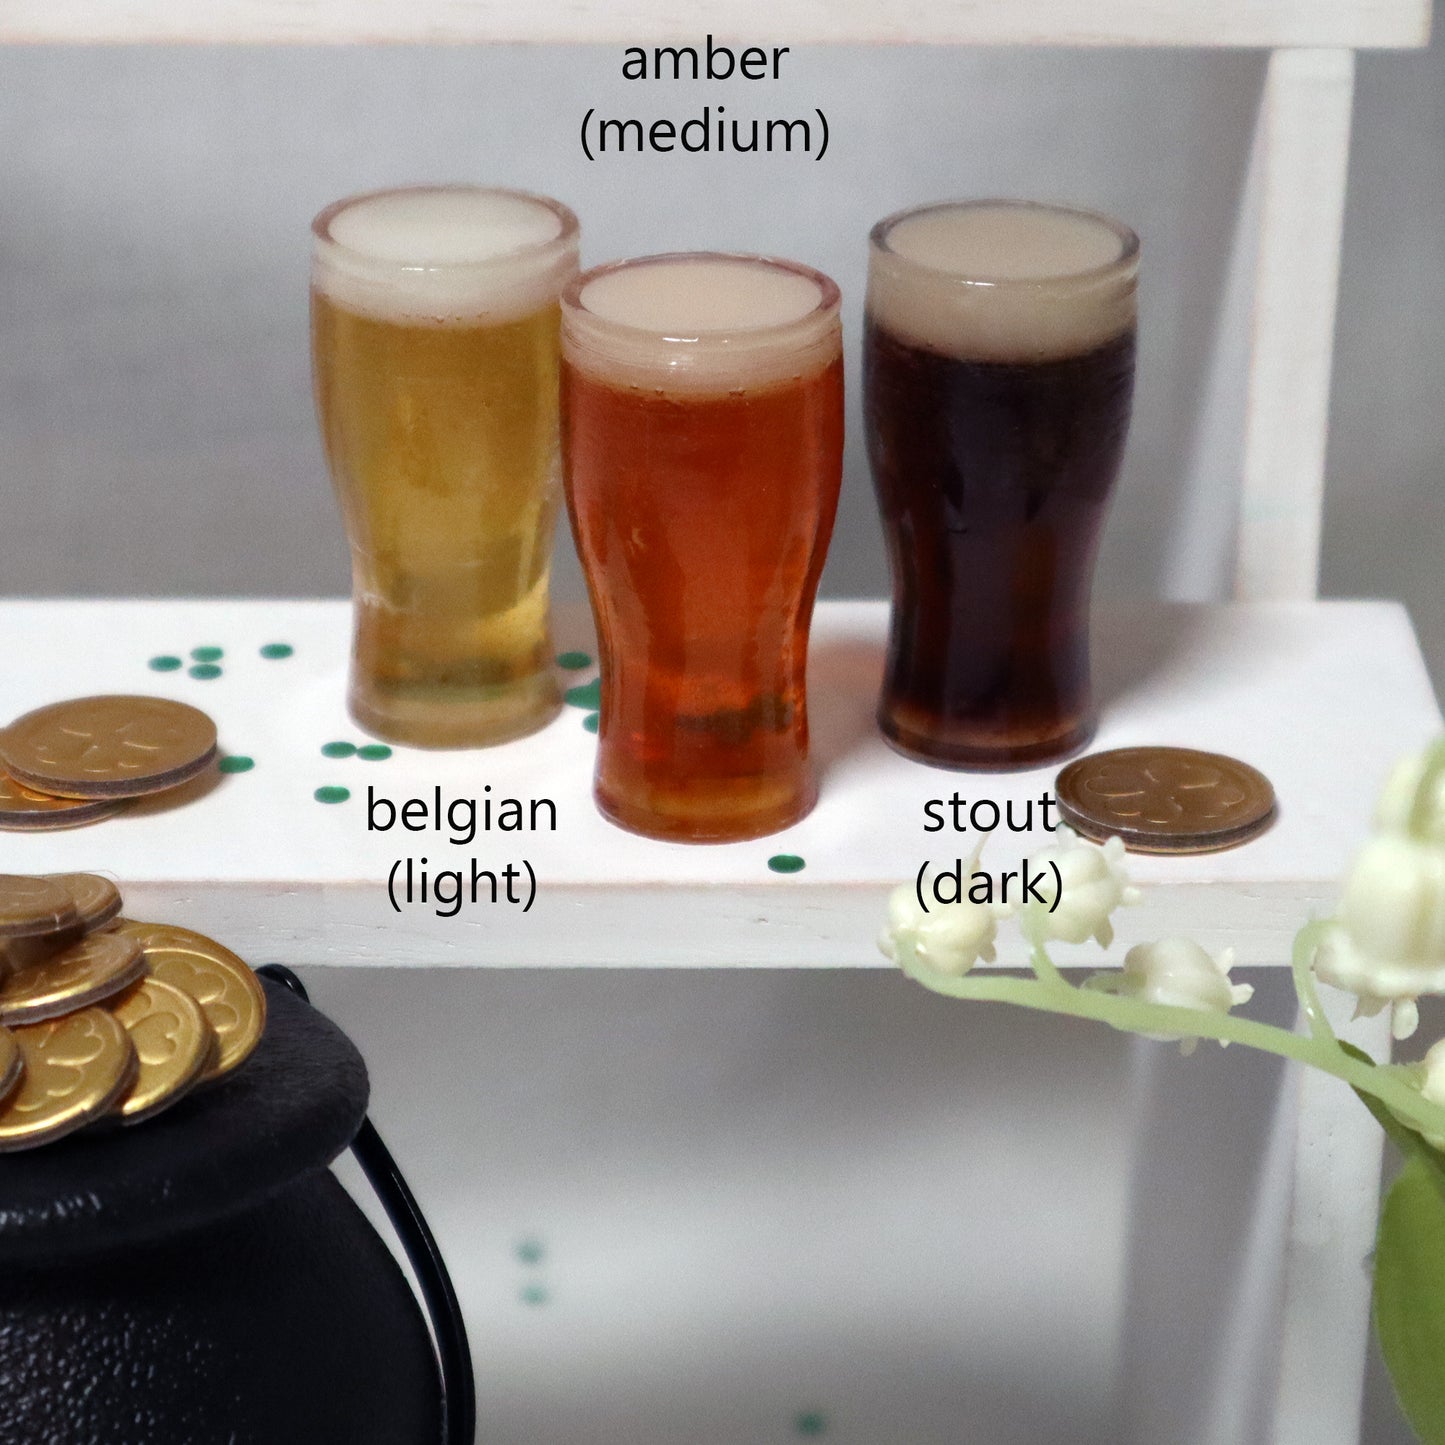 1/3 & 1/4 Scale Prop Set for BJD - Beer Glass - 3 Beverage Choices